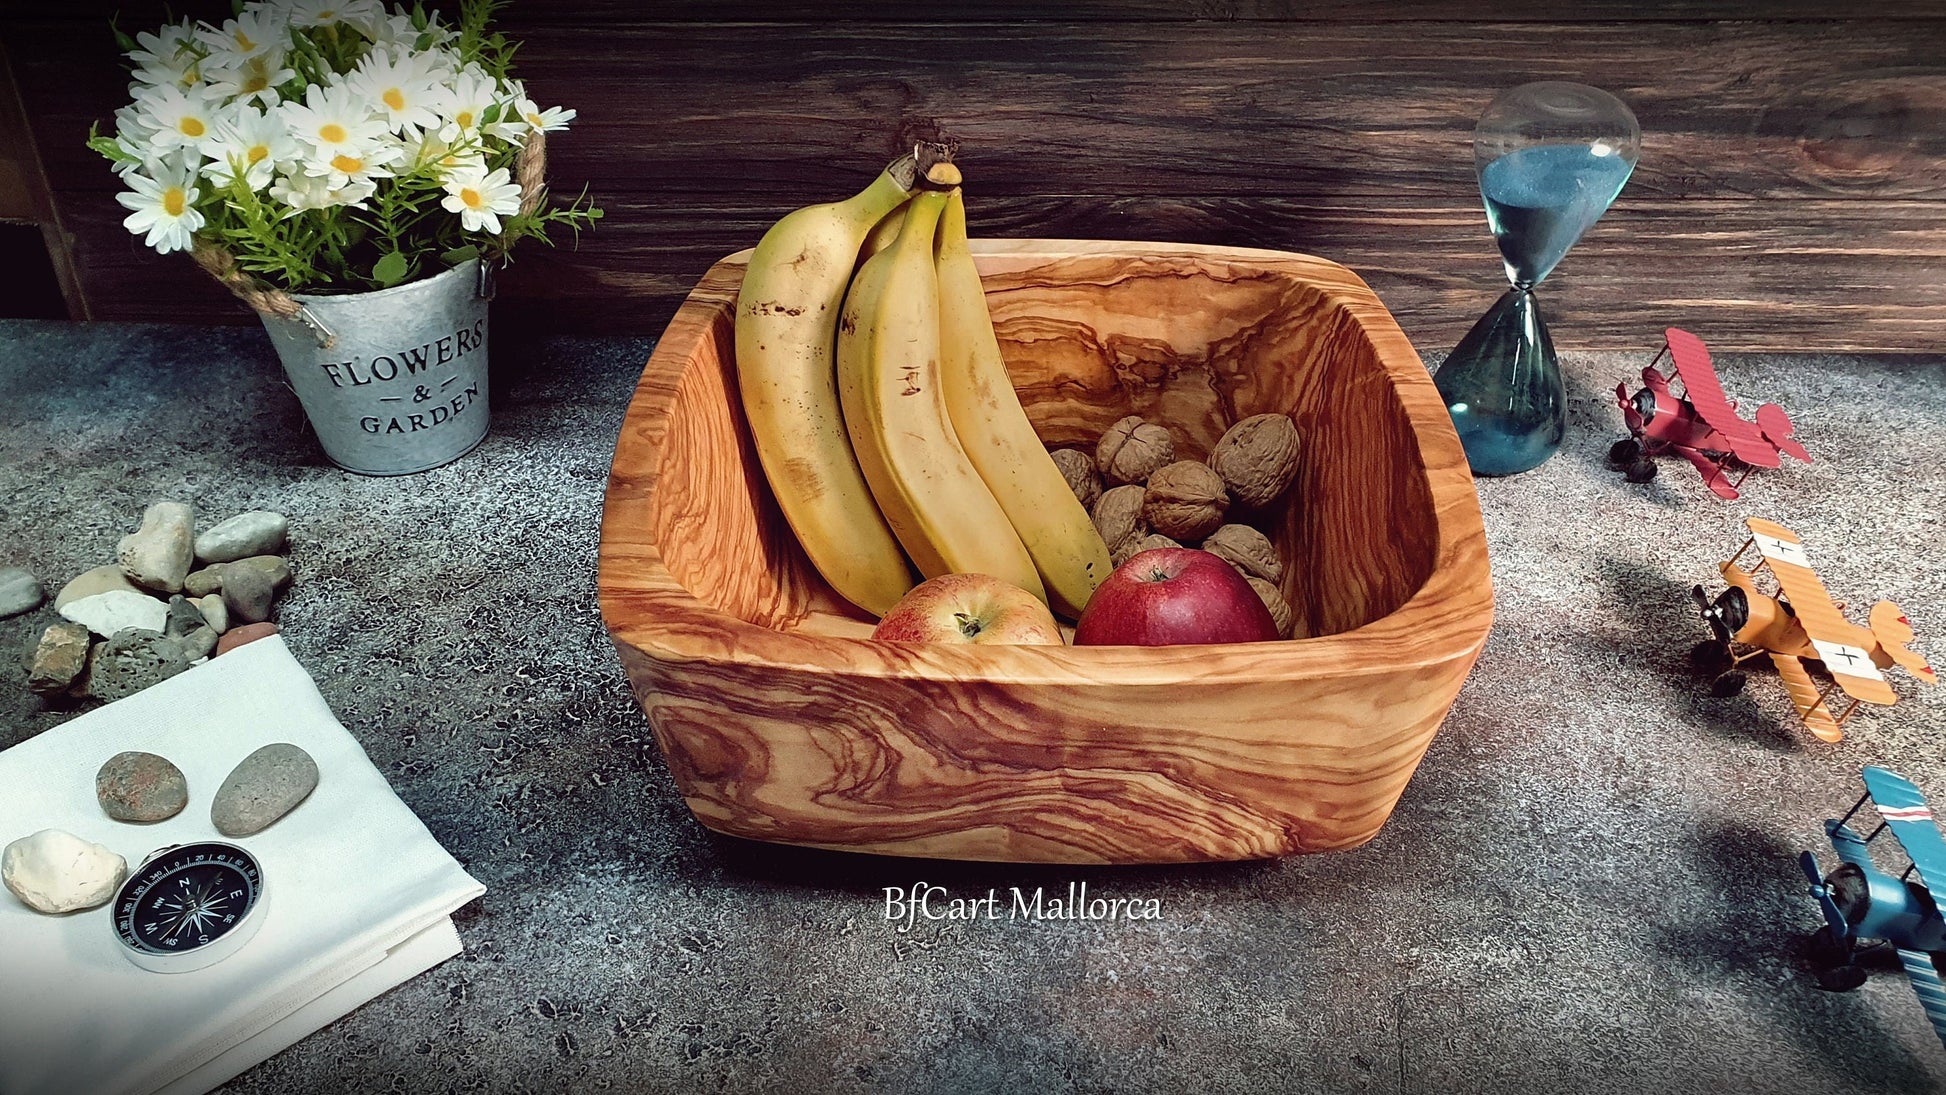 Salad bowl or square fruit bowl in olive wood with rounded corners, very original shape with a decreasing shape to the very beautiful base. Fruit bowl filled with fruit Side view